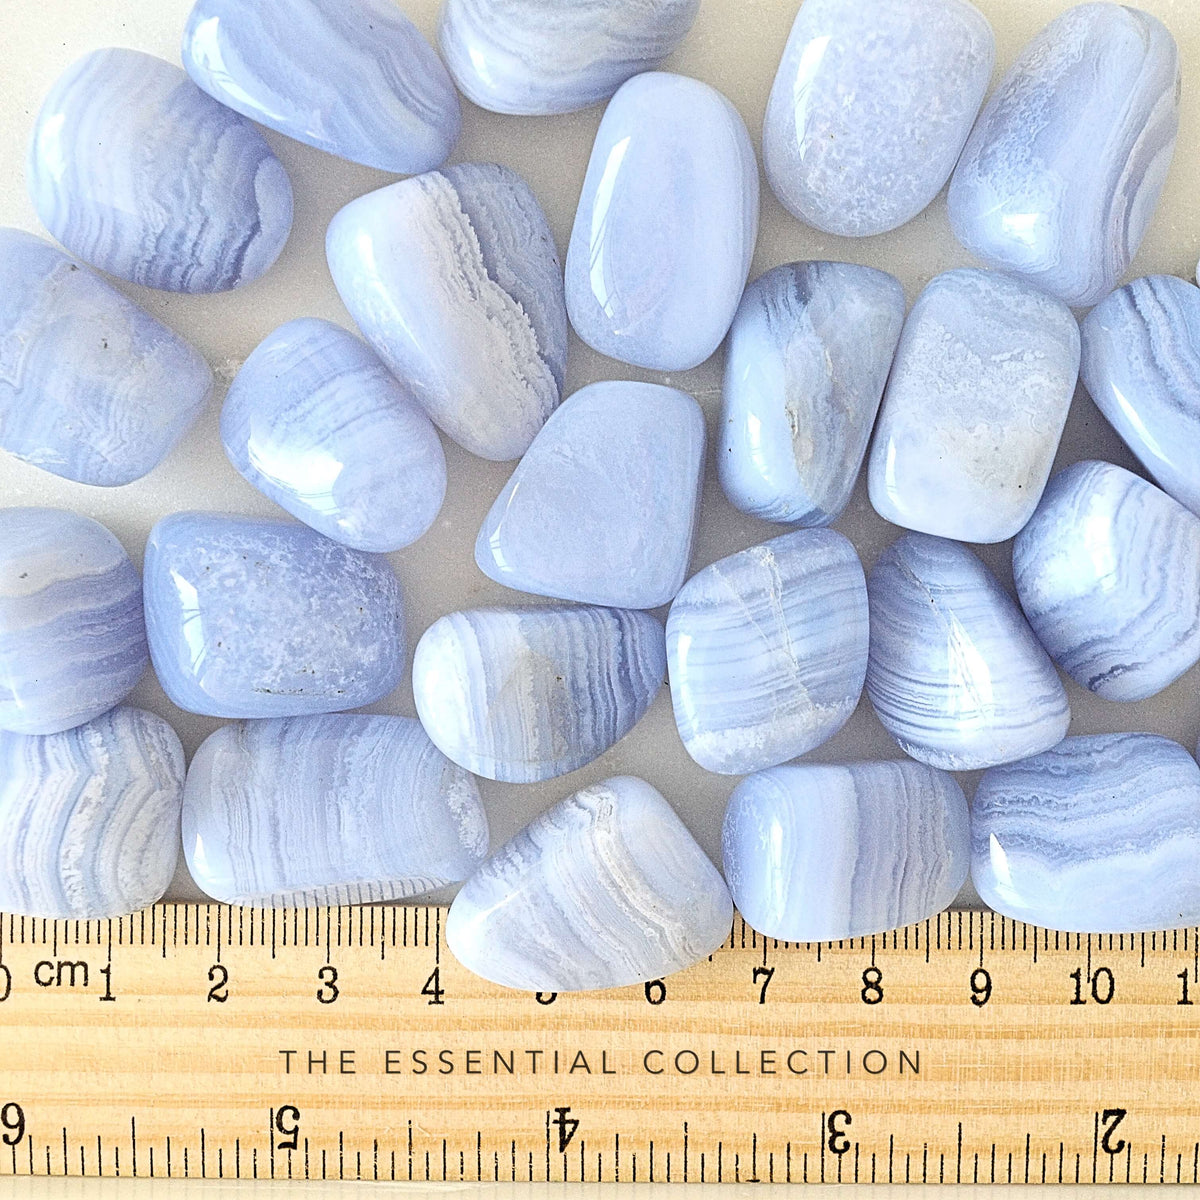 close up of blue lace agate crystals with ruler showing size